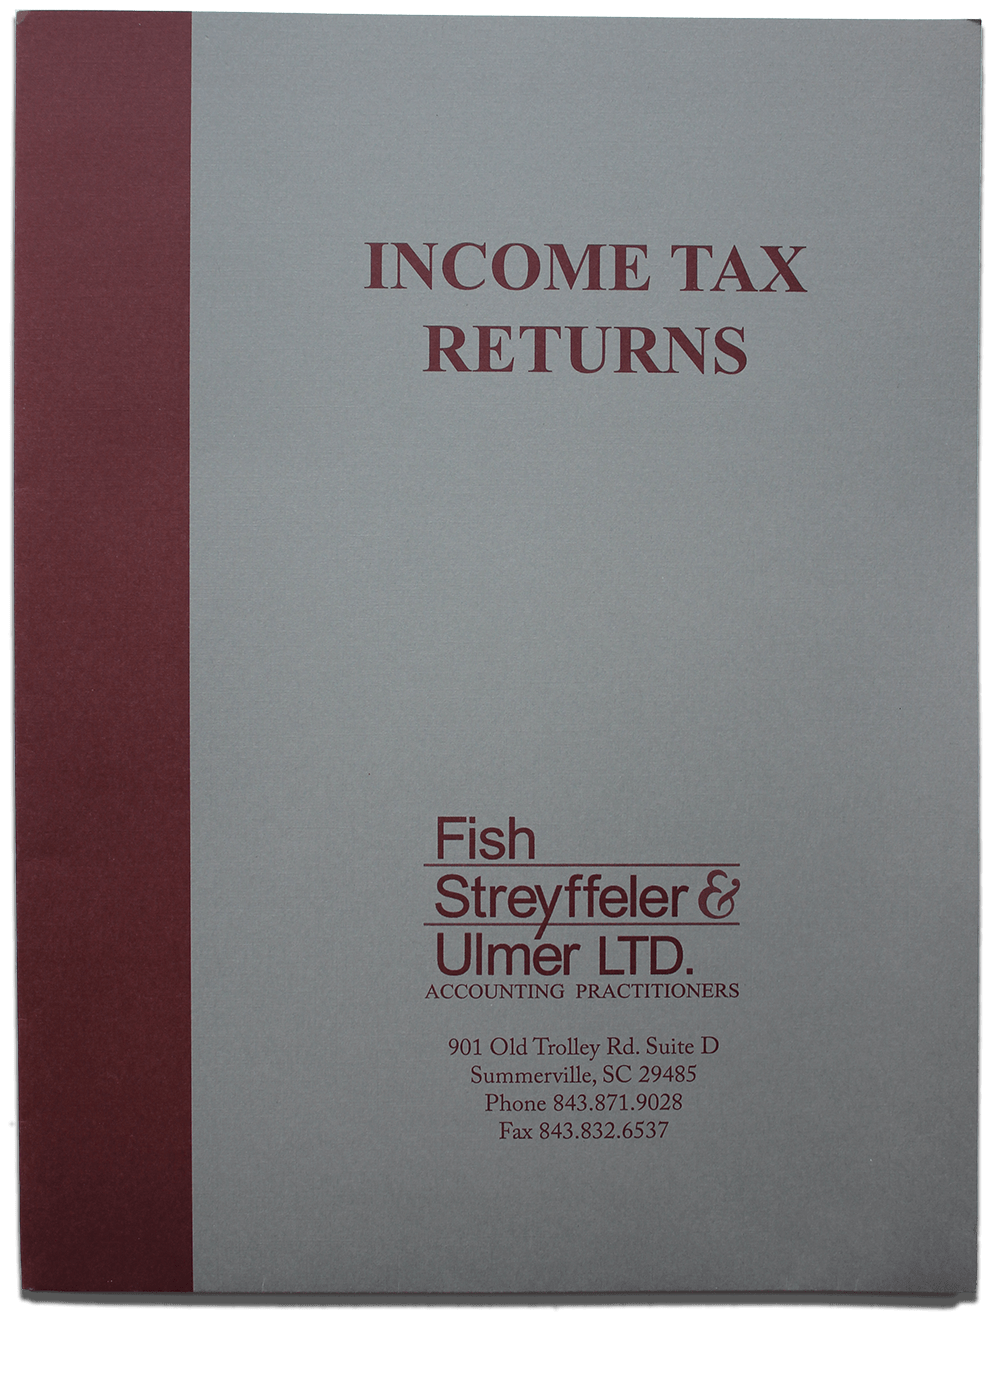 Custom Printed Tax Return Folder with Grey Paper and Burgundy Imprinting Personalized with Name and Logo - DiscountTaxForms.com